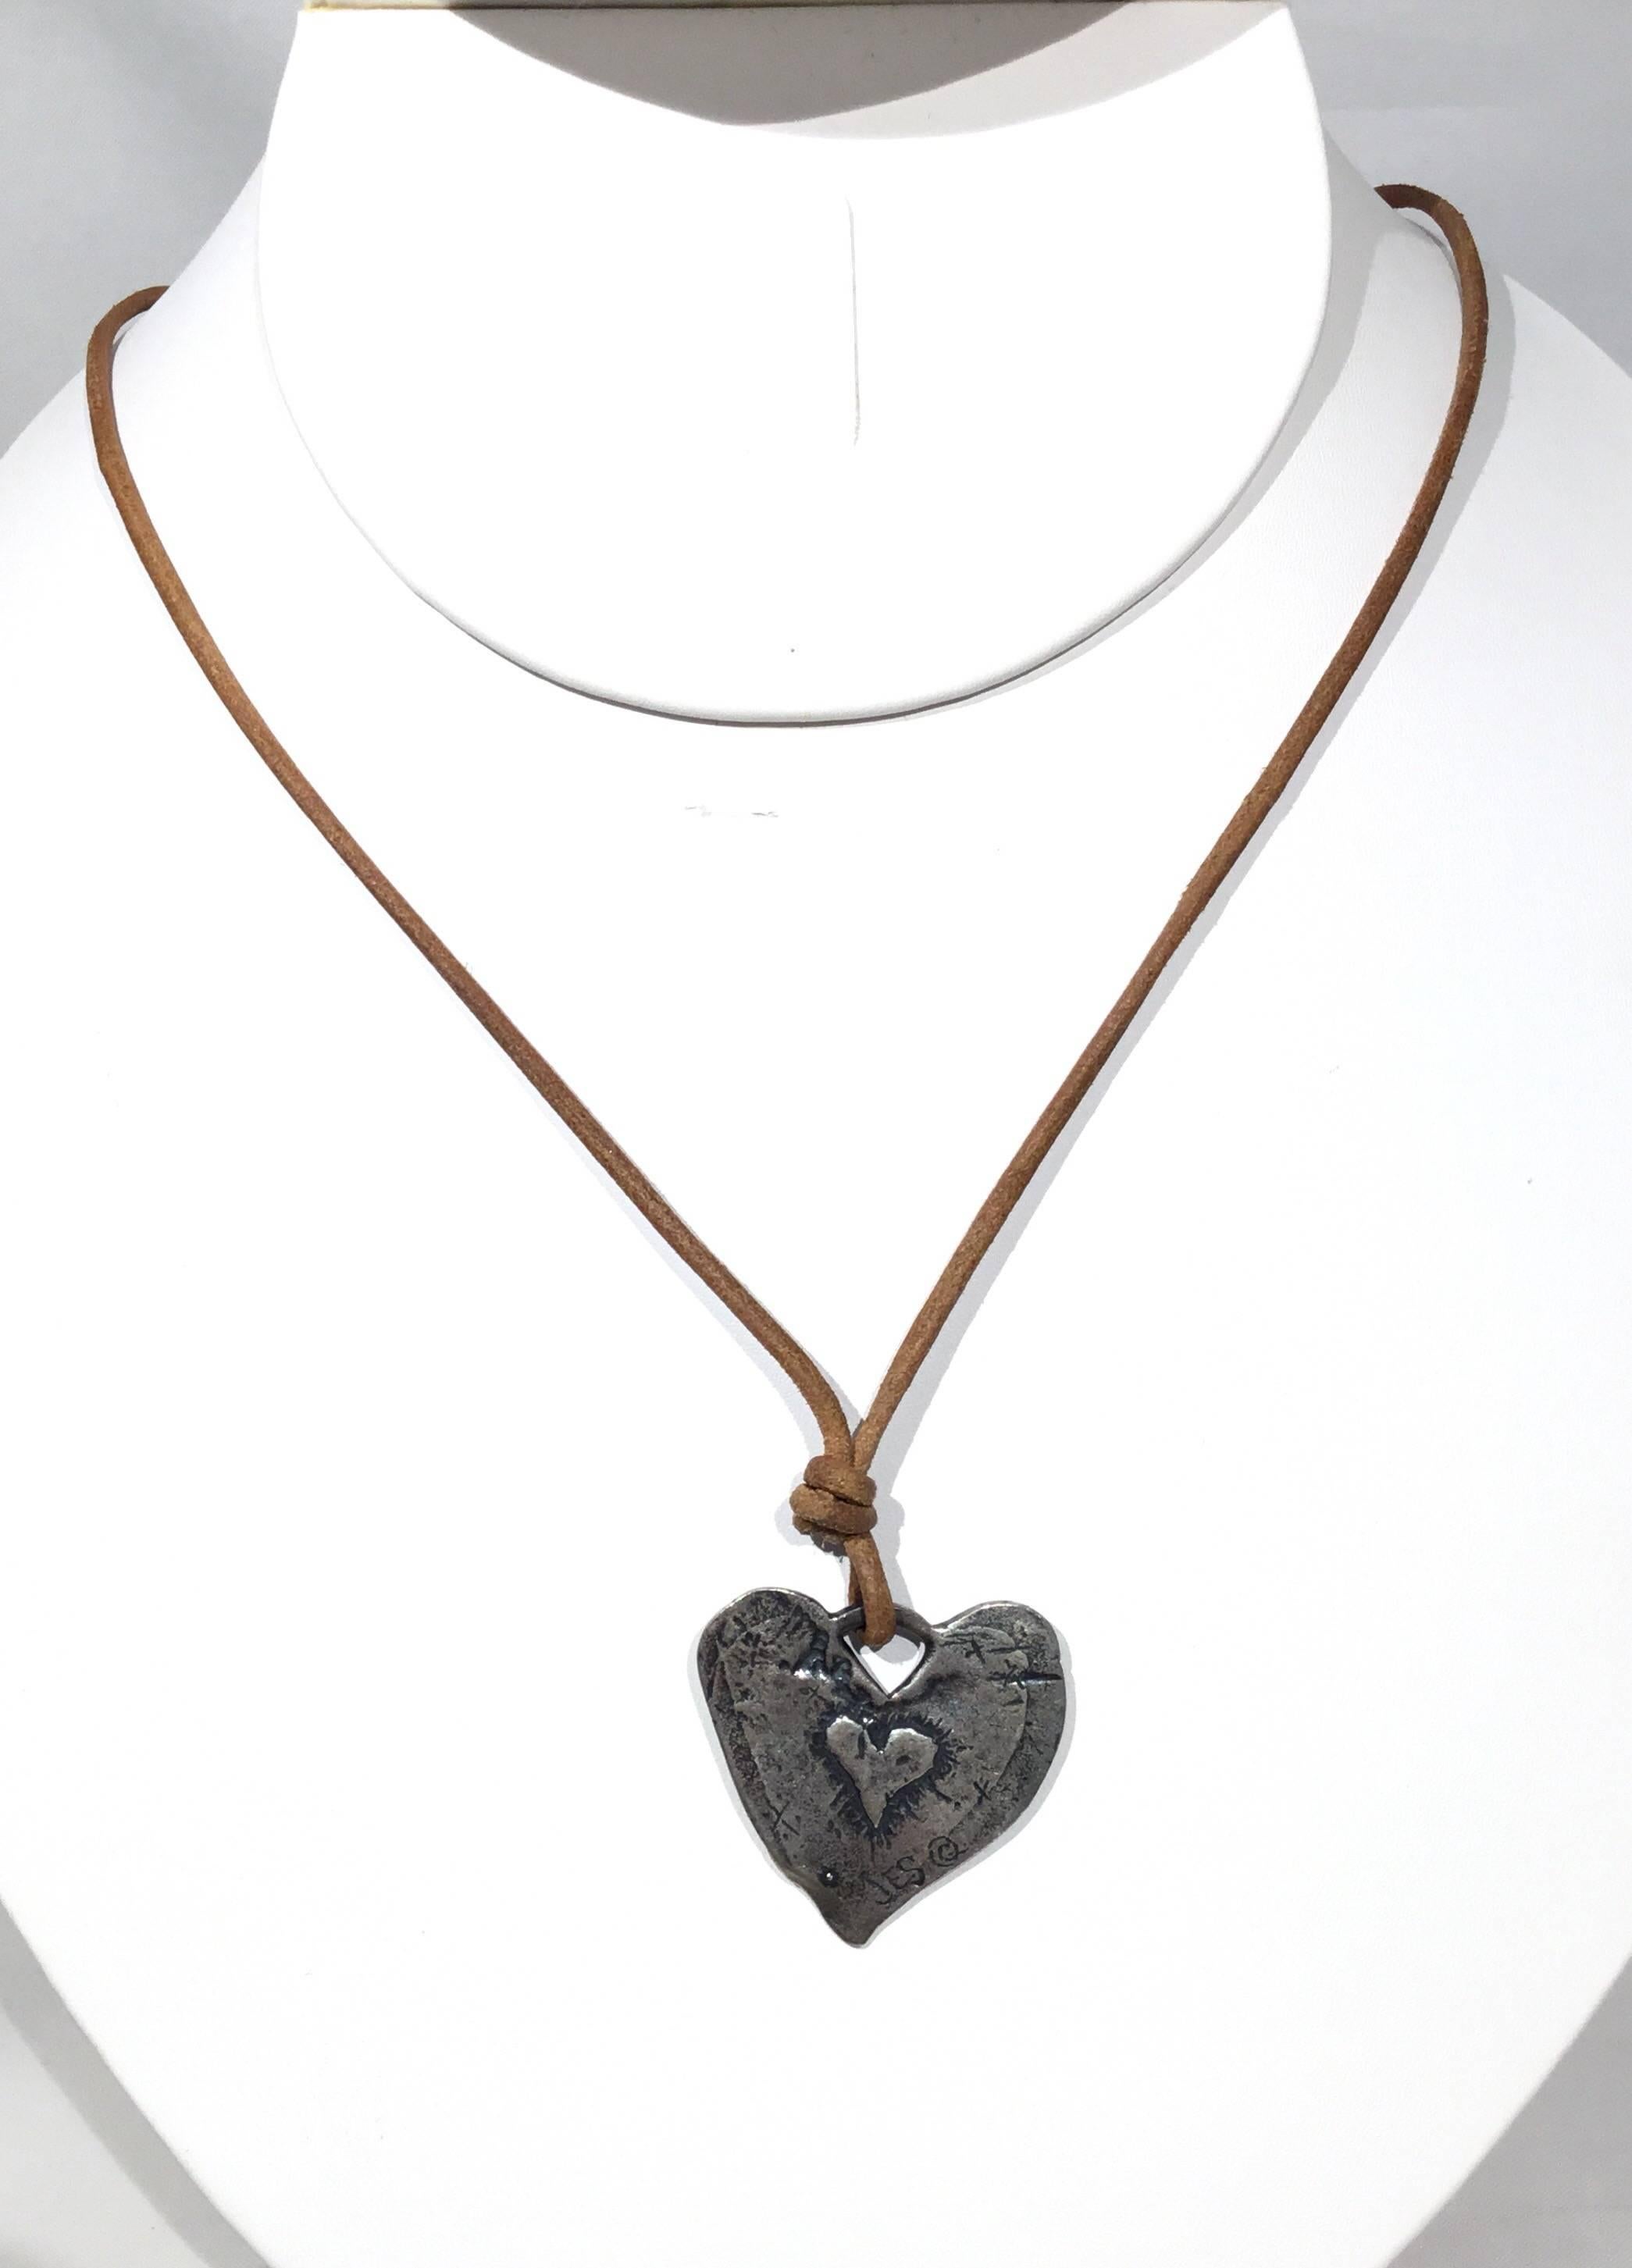 Jes Maharry, Sundance Catalog designer suede leather necklace with a sterling silver heart pendant with an engraved angel, sterling clasp closure. Length approximately 8 inches circumference 16-18